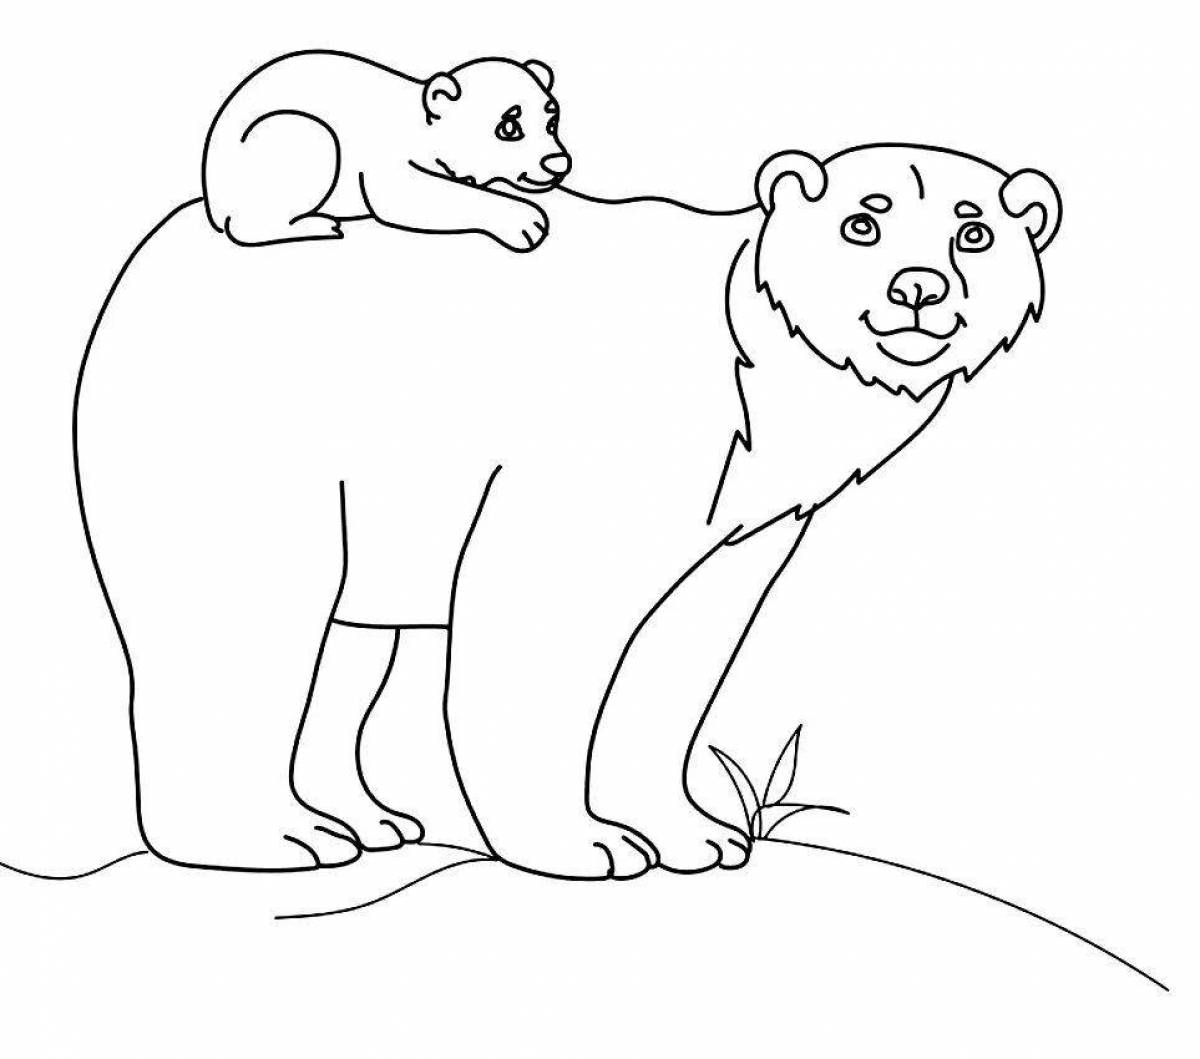 Cute white and brown bear coloring page